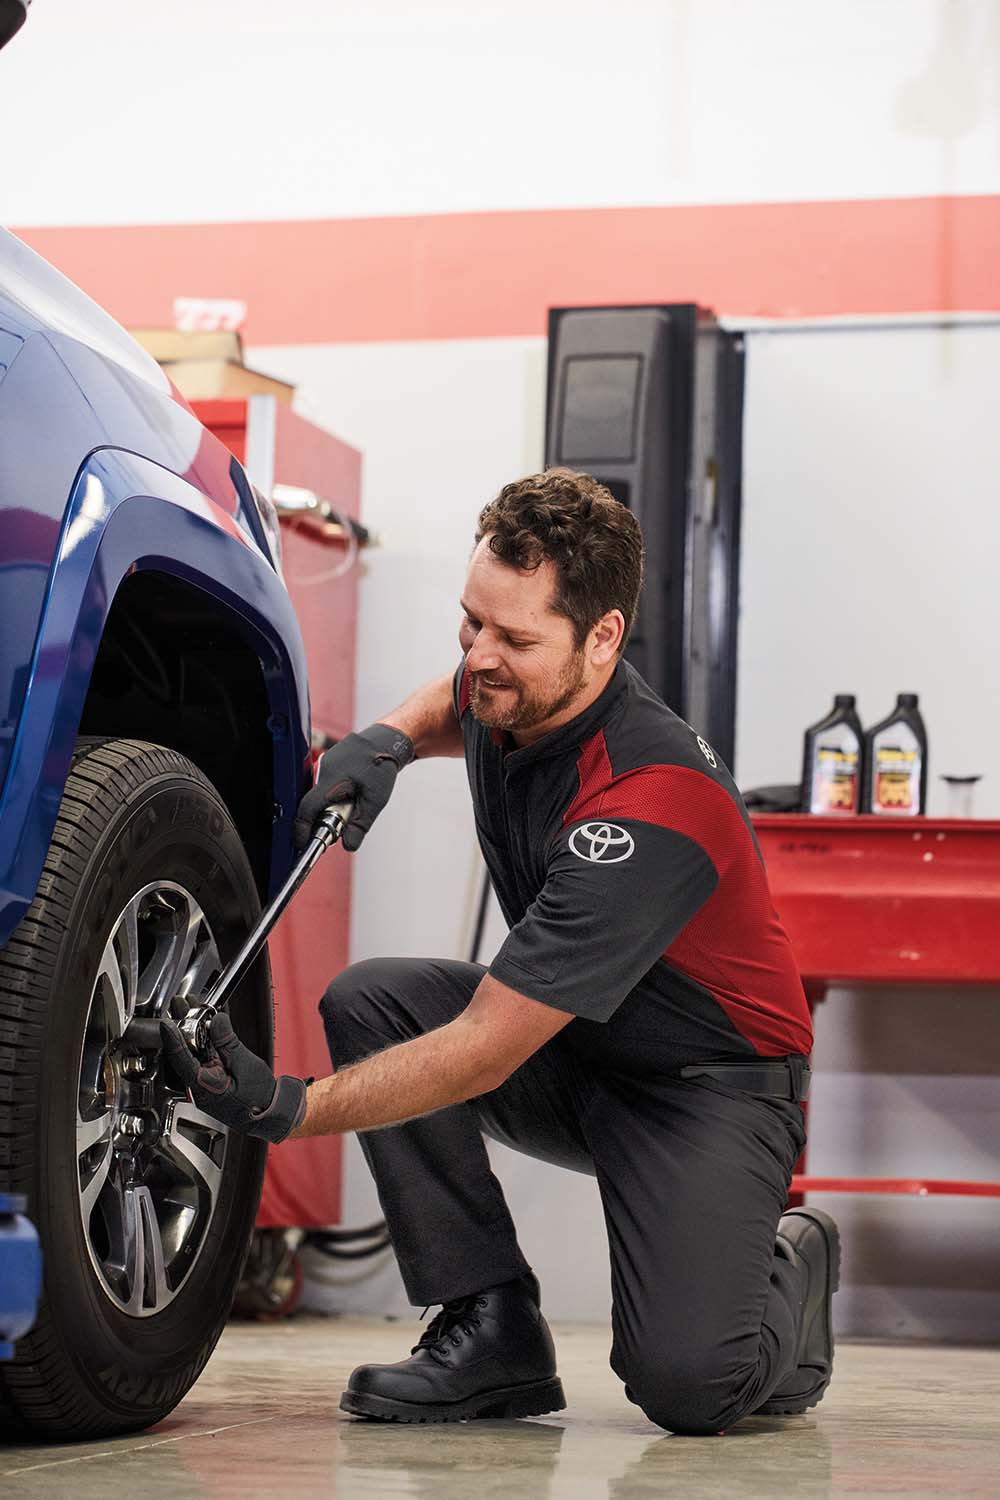 Winter Tires vs. All Season Tires at Bennett Toyota in Allentown, PA | Toyota service technician replacing tires on a Toyota Tacoma